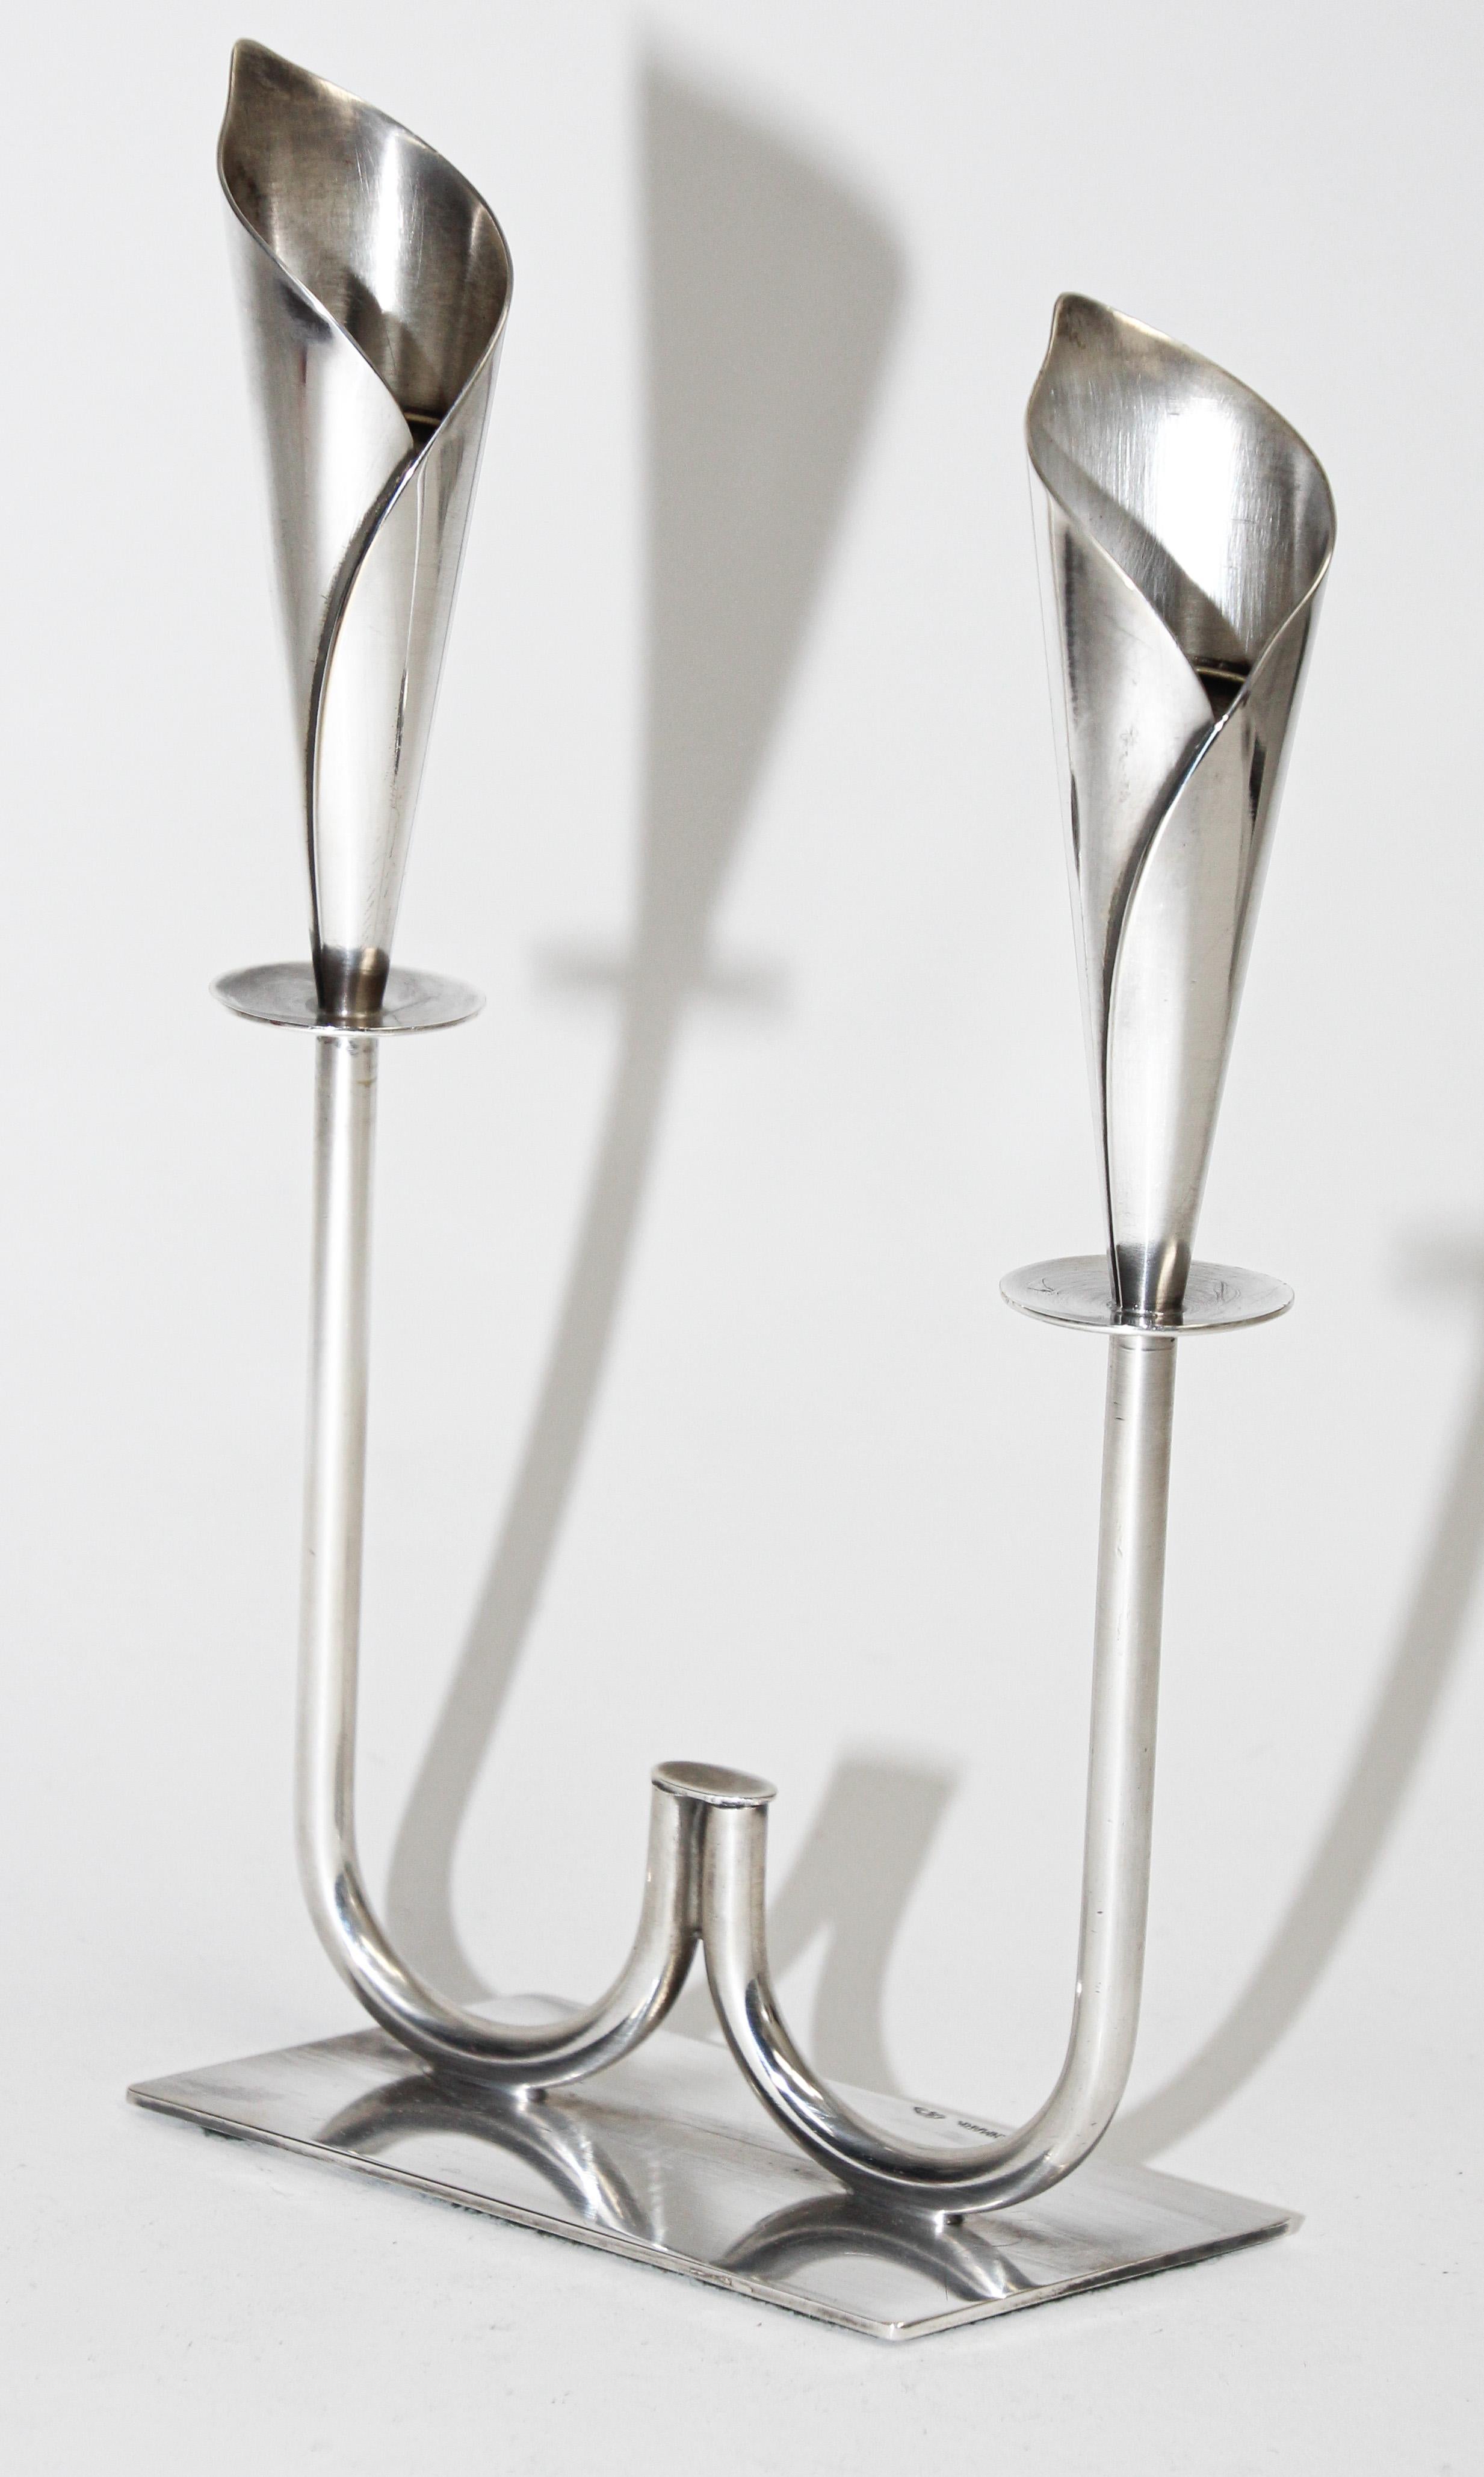 Hans Jensen Calla Lily candle holders in silver plate. 
by Hans Jensen, marked “Denmark” along with the maker’s mark. 
Vintage Mid-Century Danish Modern Hans Jensen silver plated sculptural Calla Lily candleholder featuring two candle cups, in a